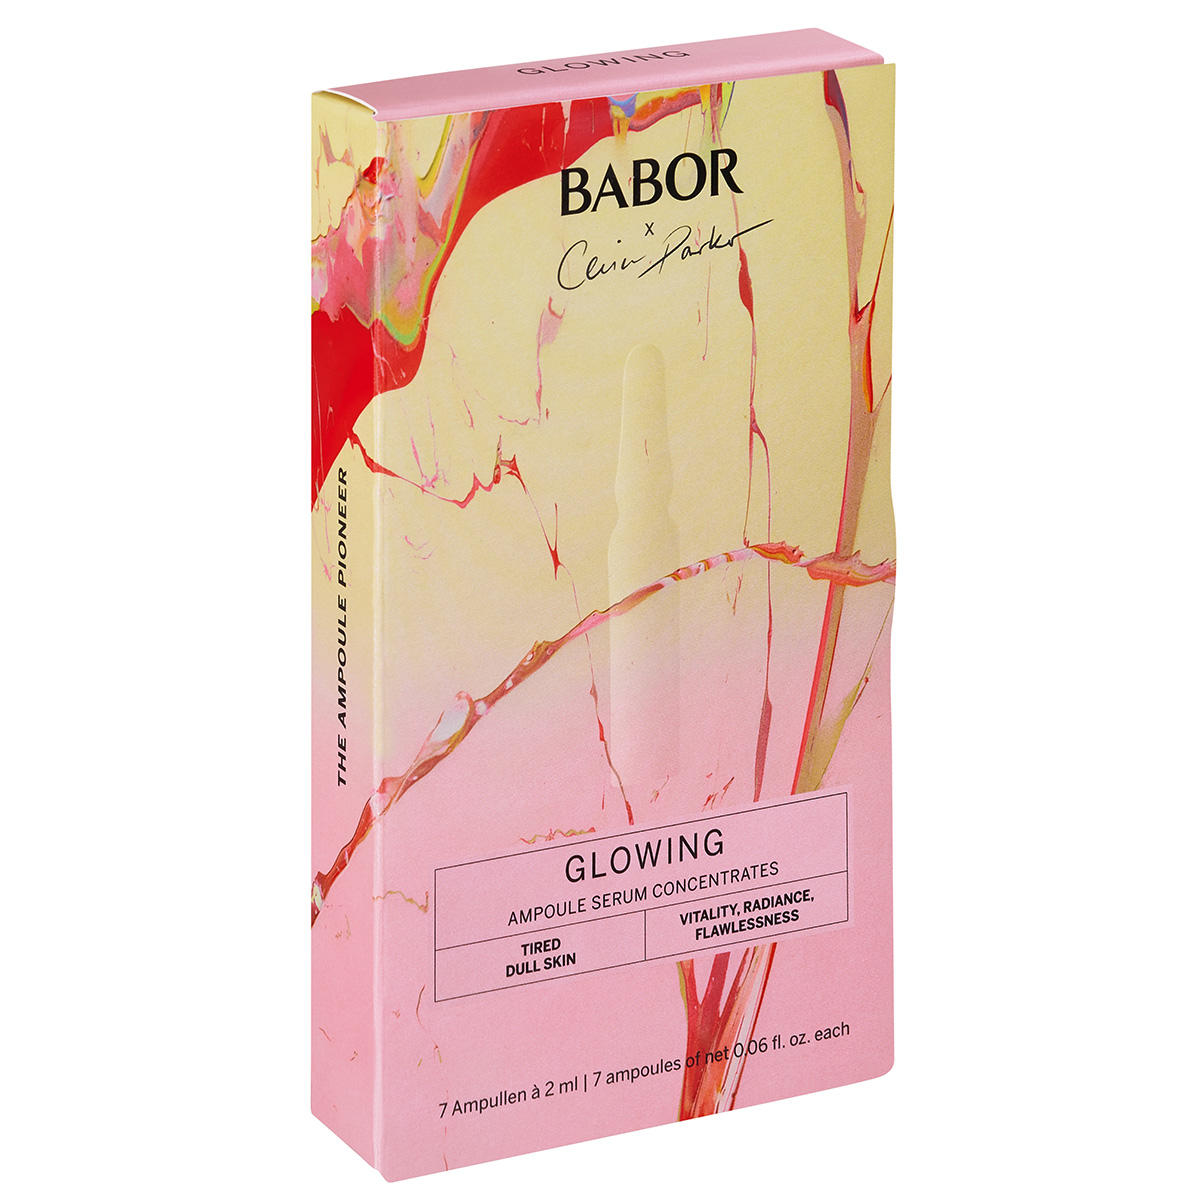 BABOR AMPOULE CONCENTRATES Glowing Ampoule Limited Edition 7 x 2 ml - 2